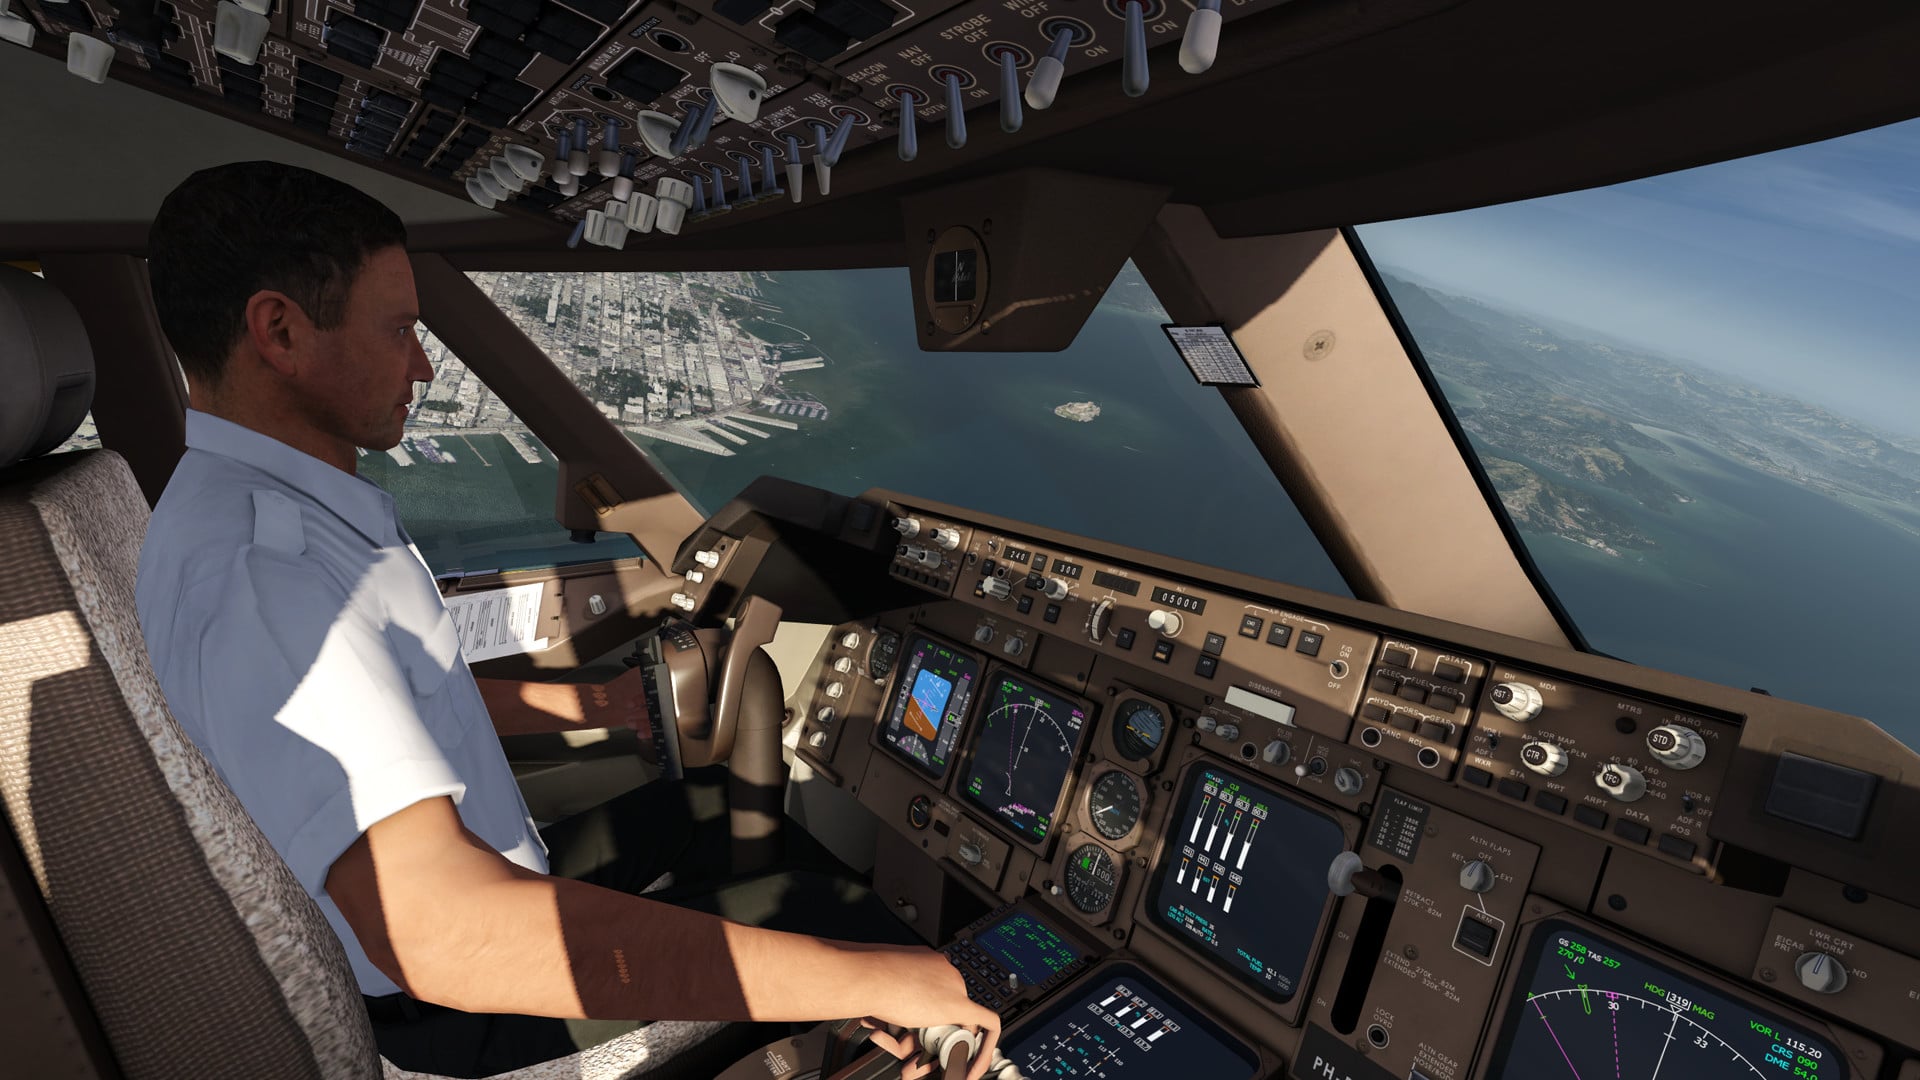 Top 5 Flight Simulator Games for Android 2023 #mryou2ber #top5games #p